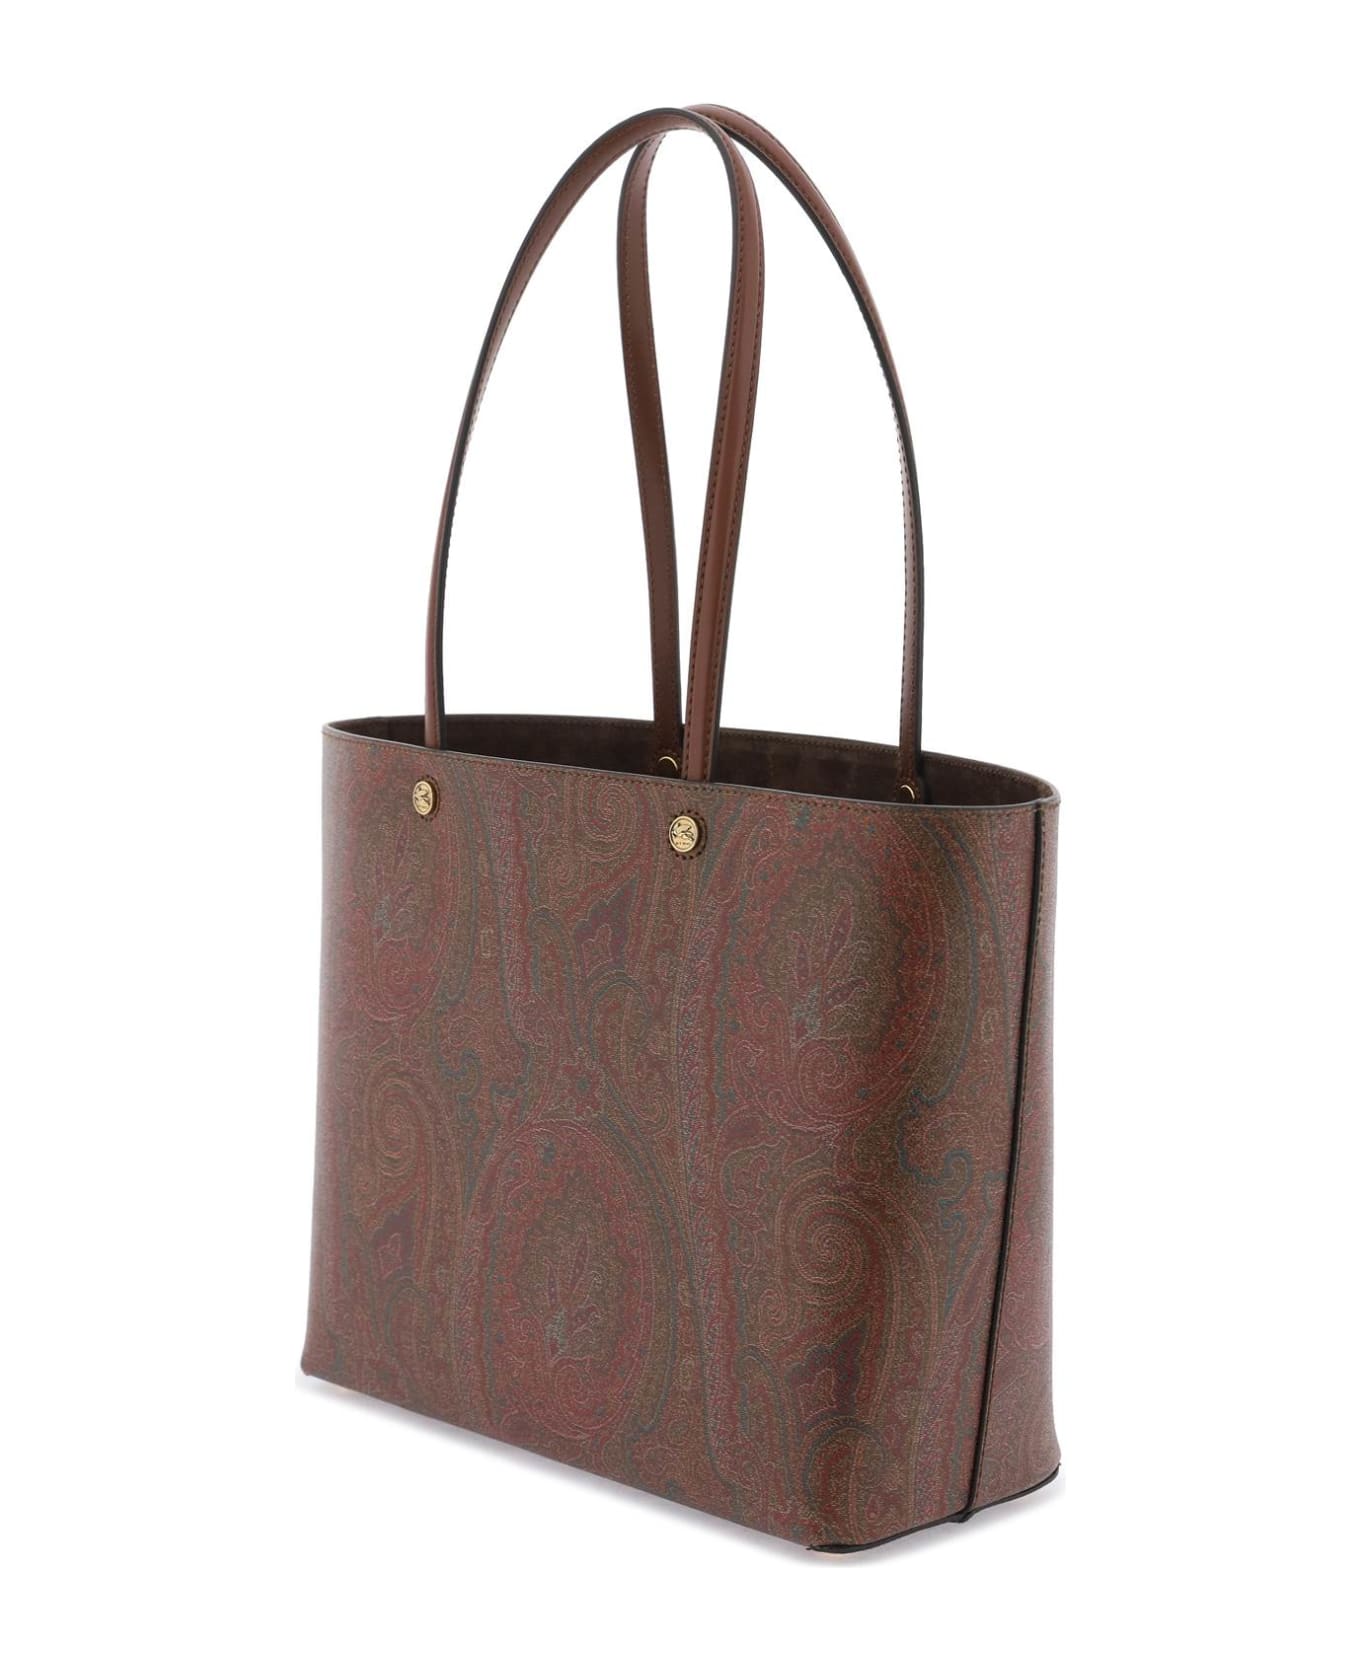 Etro Brown Leather Blend Bag - Brown トートバッグ